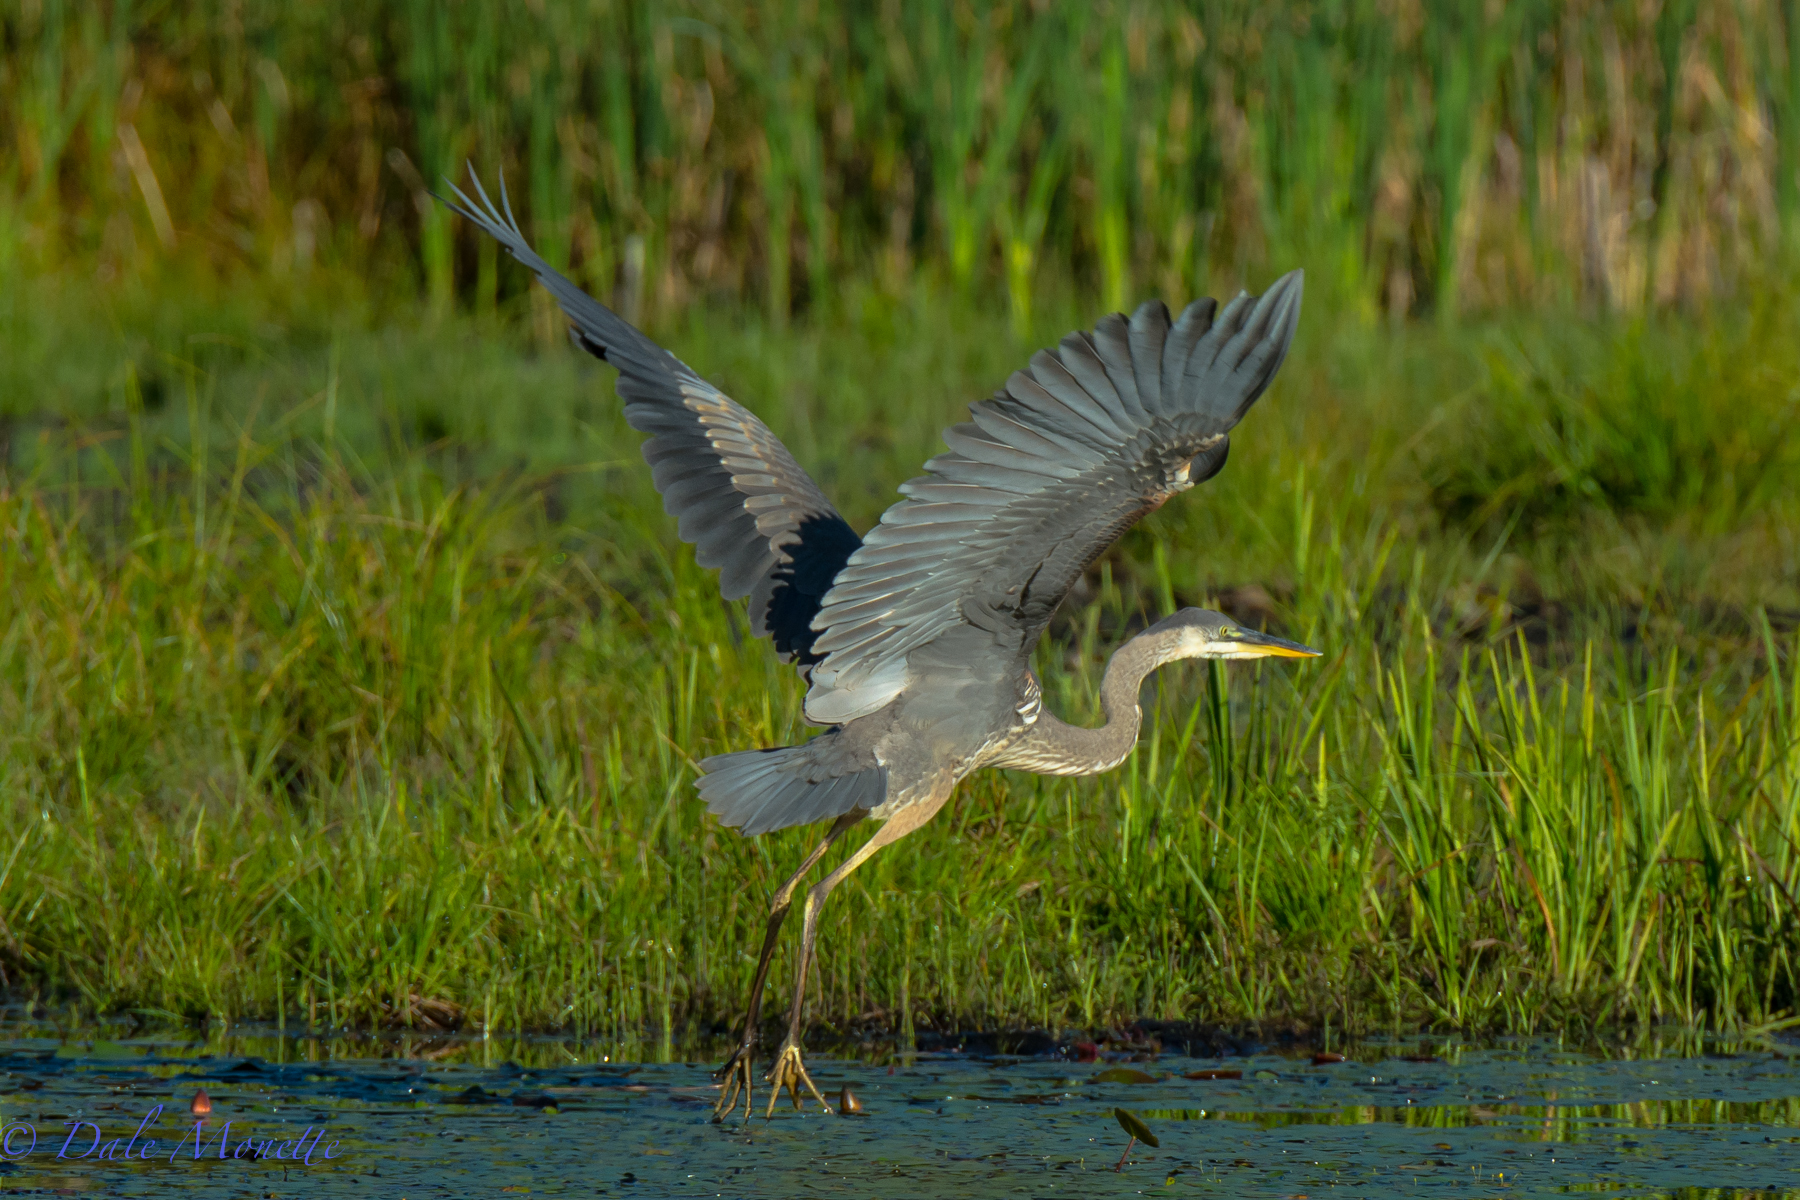 GB Heron on its take off…… can't resist taking pictures of these fabulous birds. 9/15/15